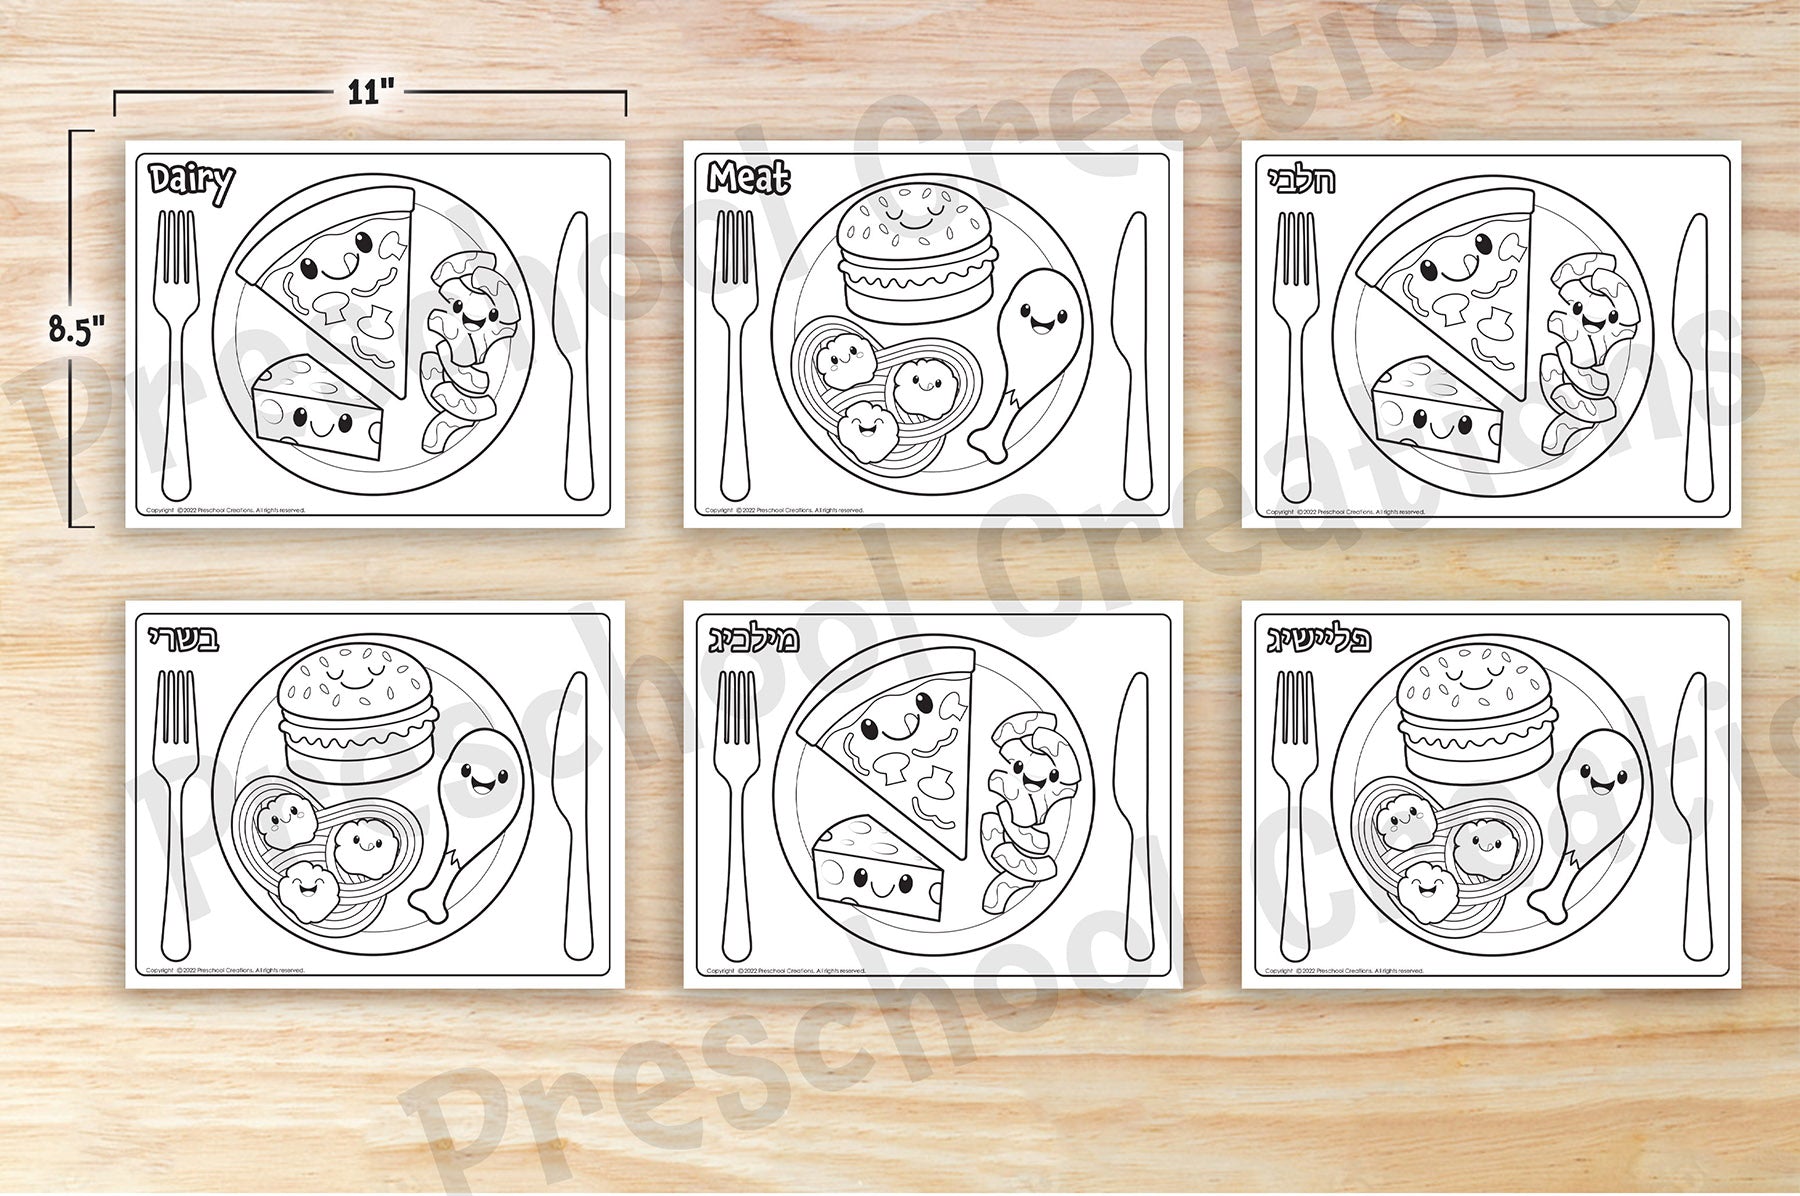 Create and color your own meat and dairy kosher placemats. You can color or paint them and then laminate for a waterproof finish you can use during your meals.  Great for teaching about kosher, brachos and parshas mishpatim where we learn the mitzvah of not mixing meat and milk.  The file comes with 3 variations for both meat and dairy in English, Hebrew and Yiddish.  Meat/dairy  חלבי/בשרי  מילכיג/פליישיג